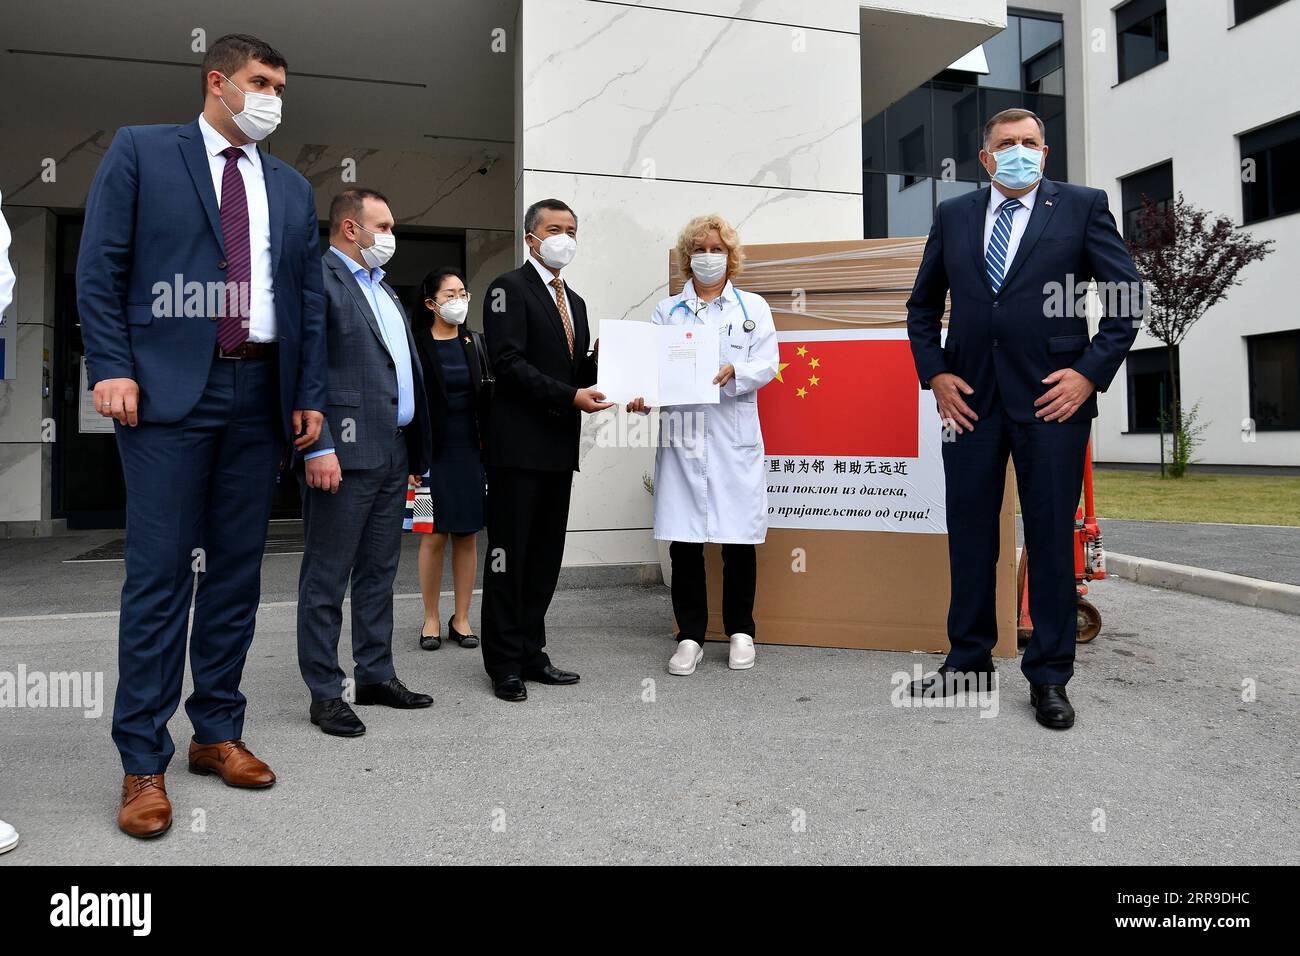 210611 -- SARAJEVO, June 11, 2021 -- Milorad Dodik 1st R, chairman of the Presidency of Bosnia and Herzegovina BiH, Jadranka Jovovic 2nd R, director of the oncology and hematology department of the Serbian Hospital, and Ji Ping 3rd R, Chinese Ambassador to BiH attend a donation ceremony of a biological safety cabinet also known as cyto chamber at the Serbian Hospital, in East Sarajevo, BiH, on June 10, 2021. The Chinese Embassy in BiH on Thursday donated a biological safety cabinet to the Serbian Hospital in East Sarajevo. TO GO WITH China donates medical equipment to hospital in BiH Photo by Stock Photo